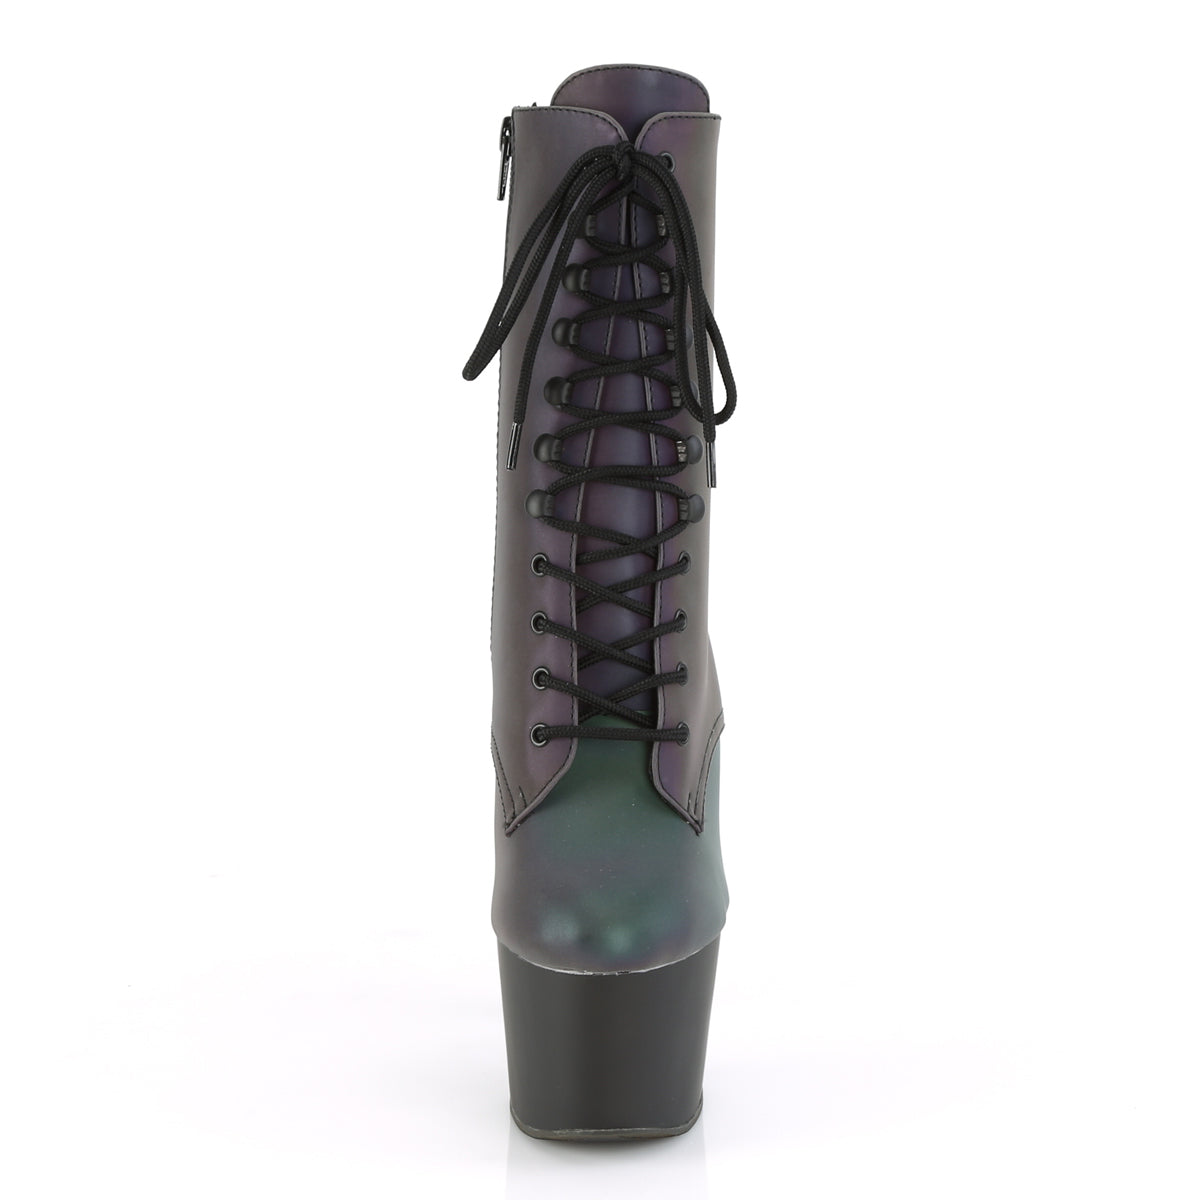 ADORE-1020REFL 7" Heel Green Multi Reflective Ankle Boots-Pleaser- Sexy Shoes Alternative Footwear